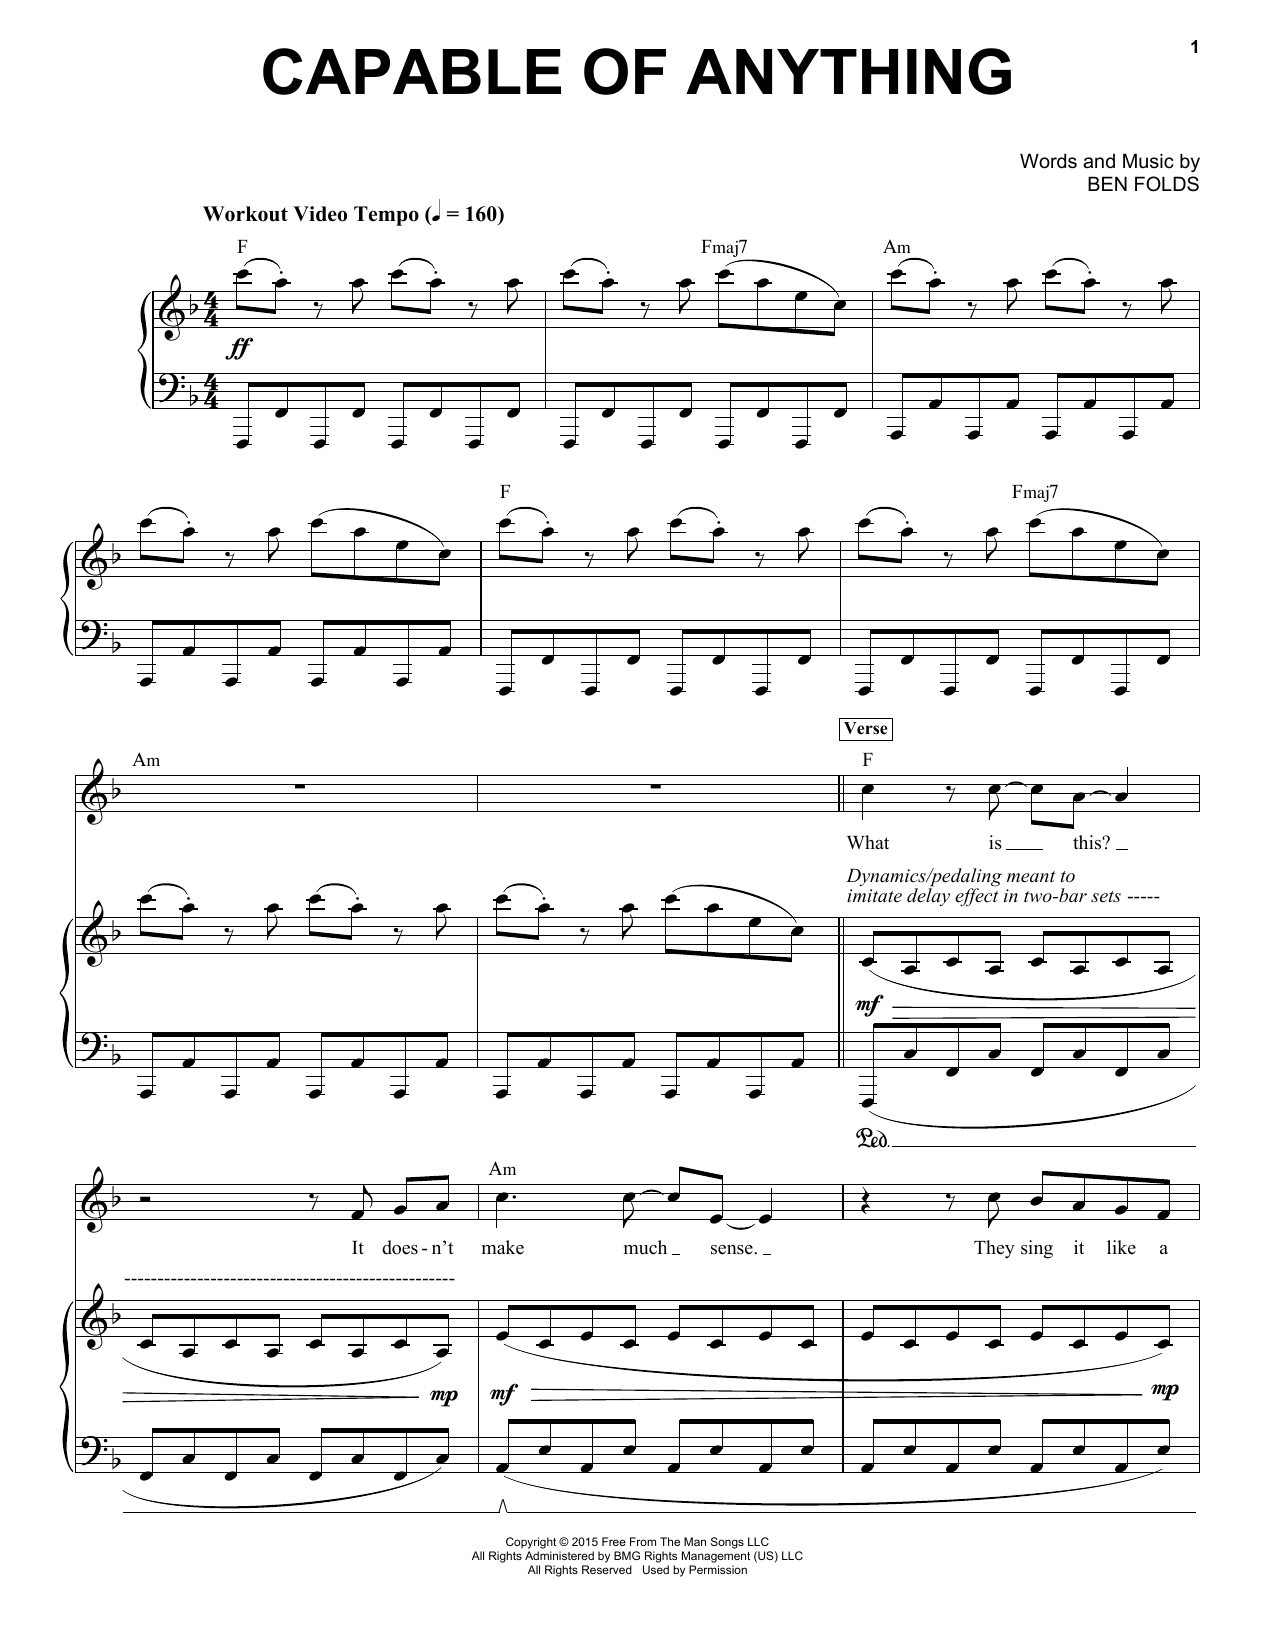 Download Ben Folds Capable Of Anything Sheet Music